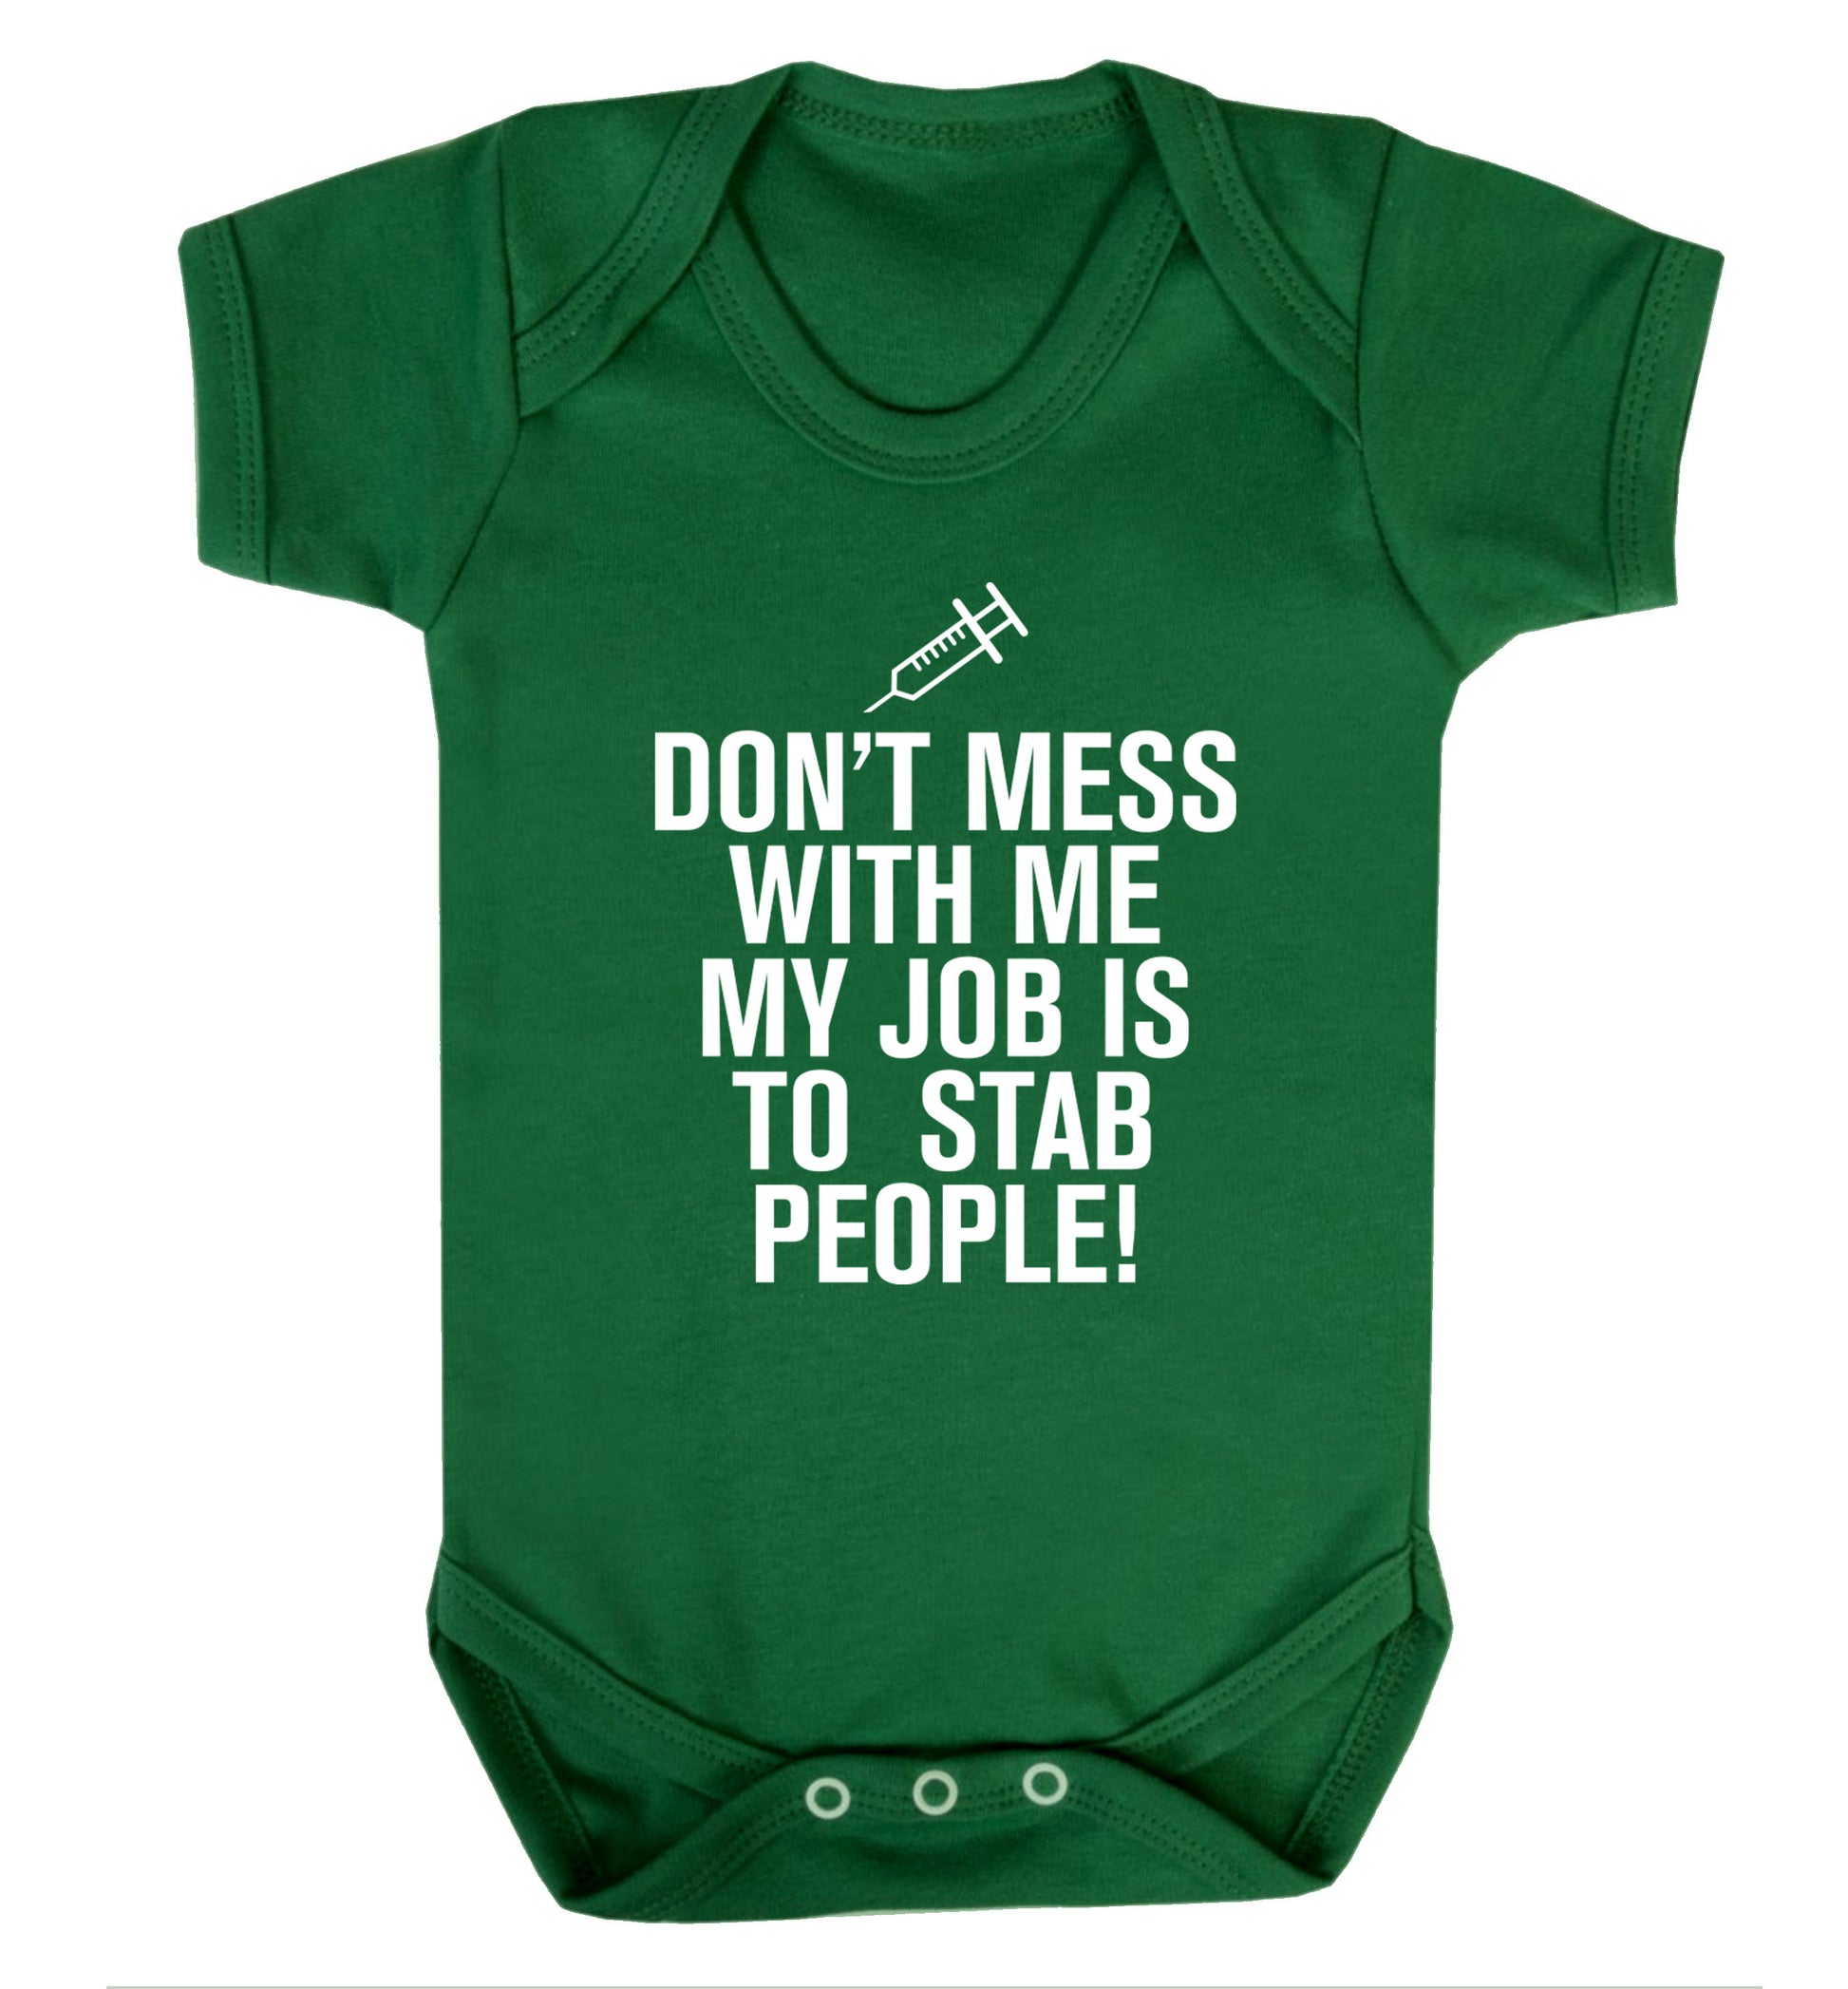 Don't mess with me my job is to stab people! Baby Vest green 18-24 months